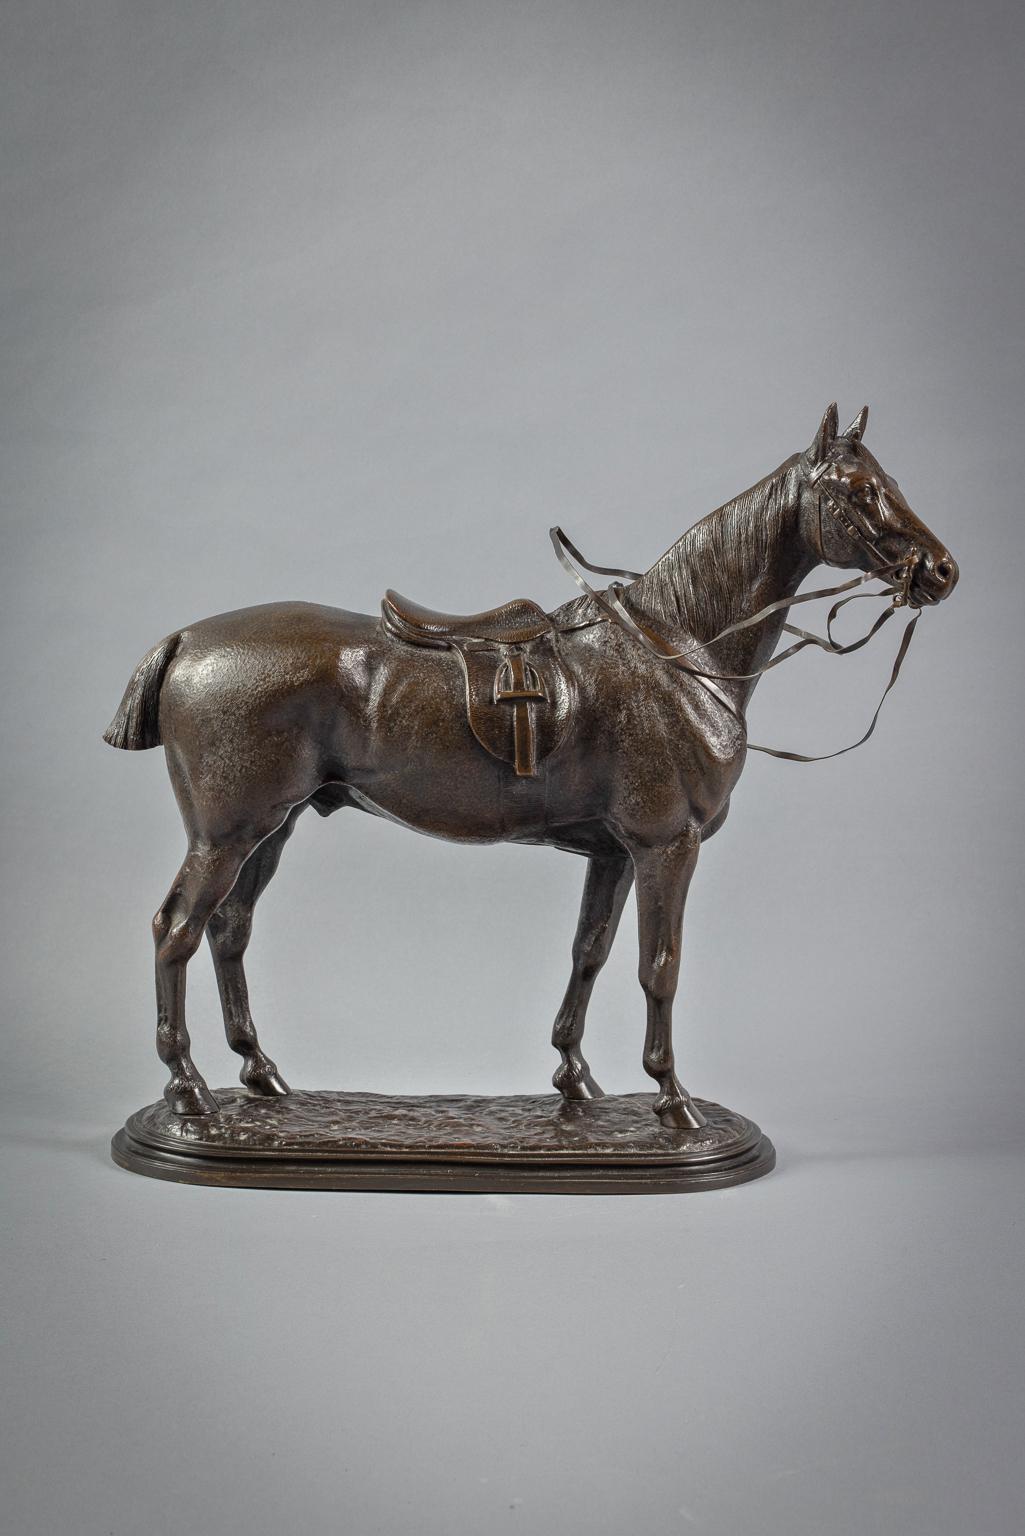 An equestrian model of a saddled horse. Inscribed John Willis Good.